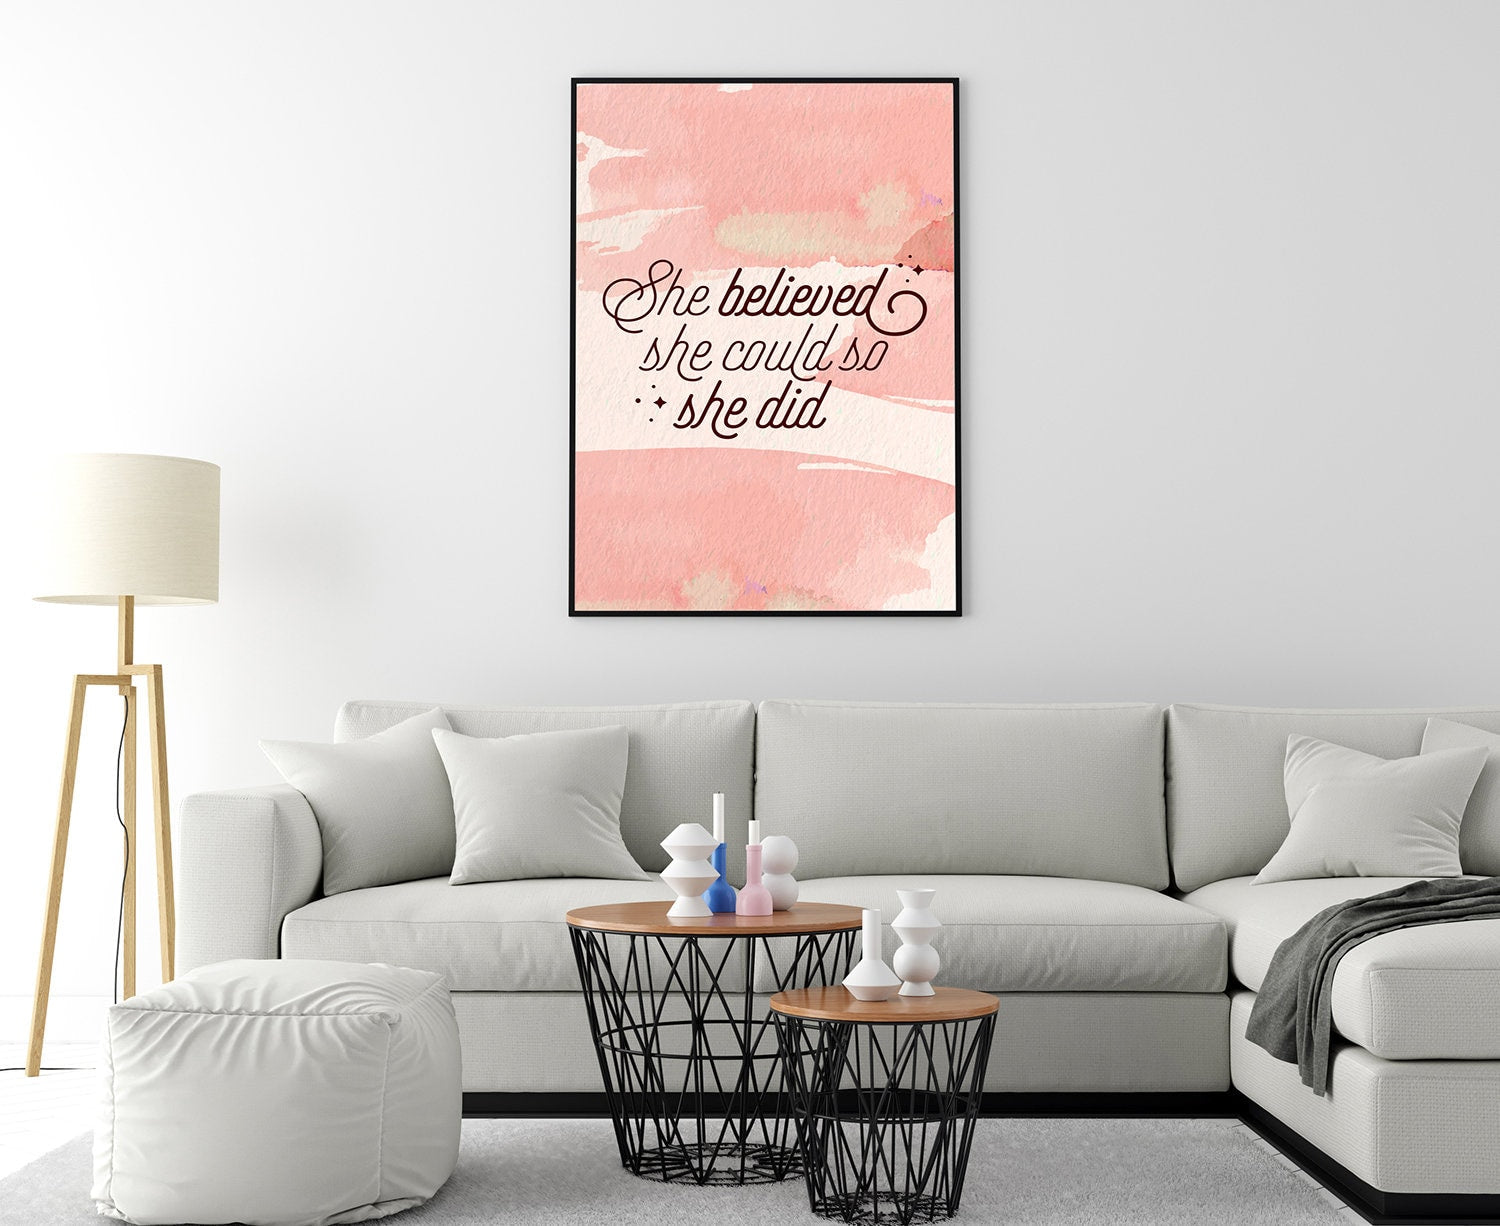 She believed she could so she.., Poster print, Home wall decor, Quote print, Motivational quote print, Office wall decor, Entrepreneur Print